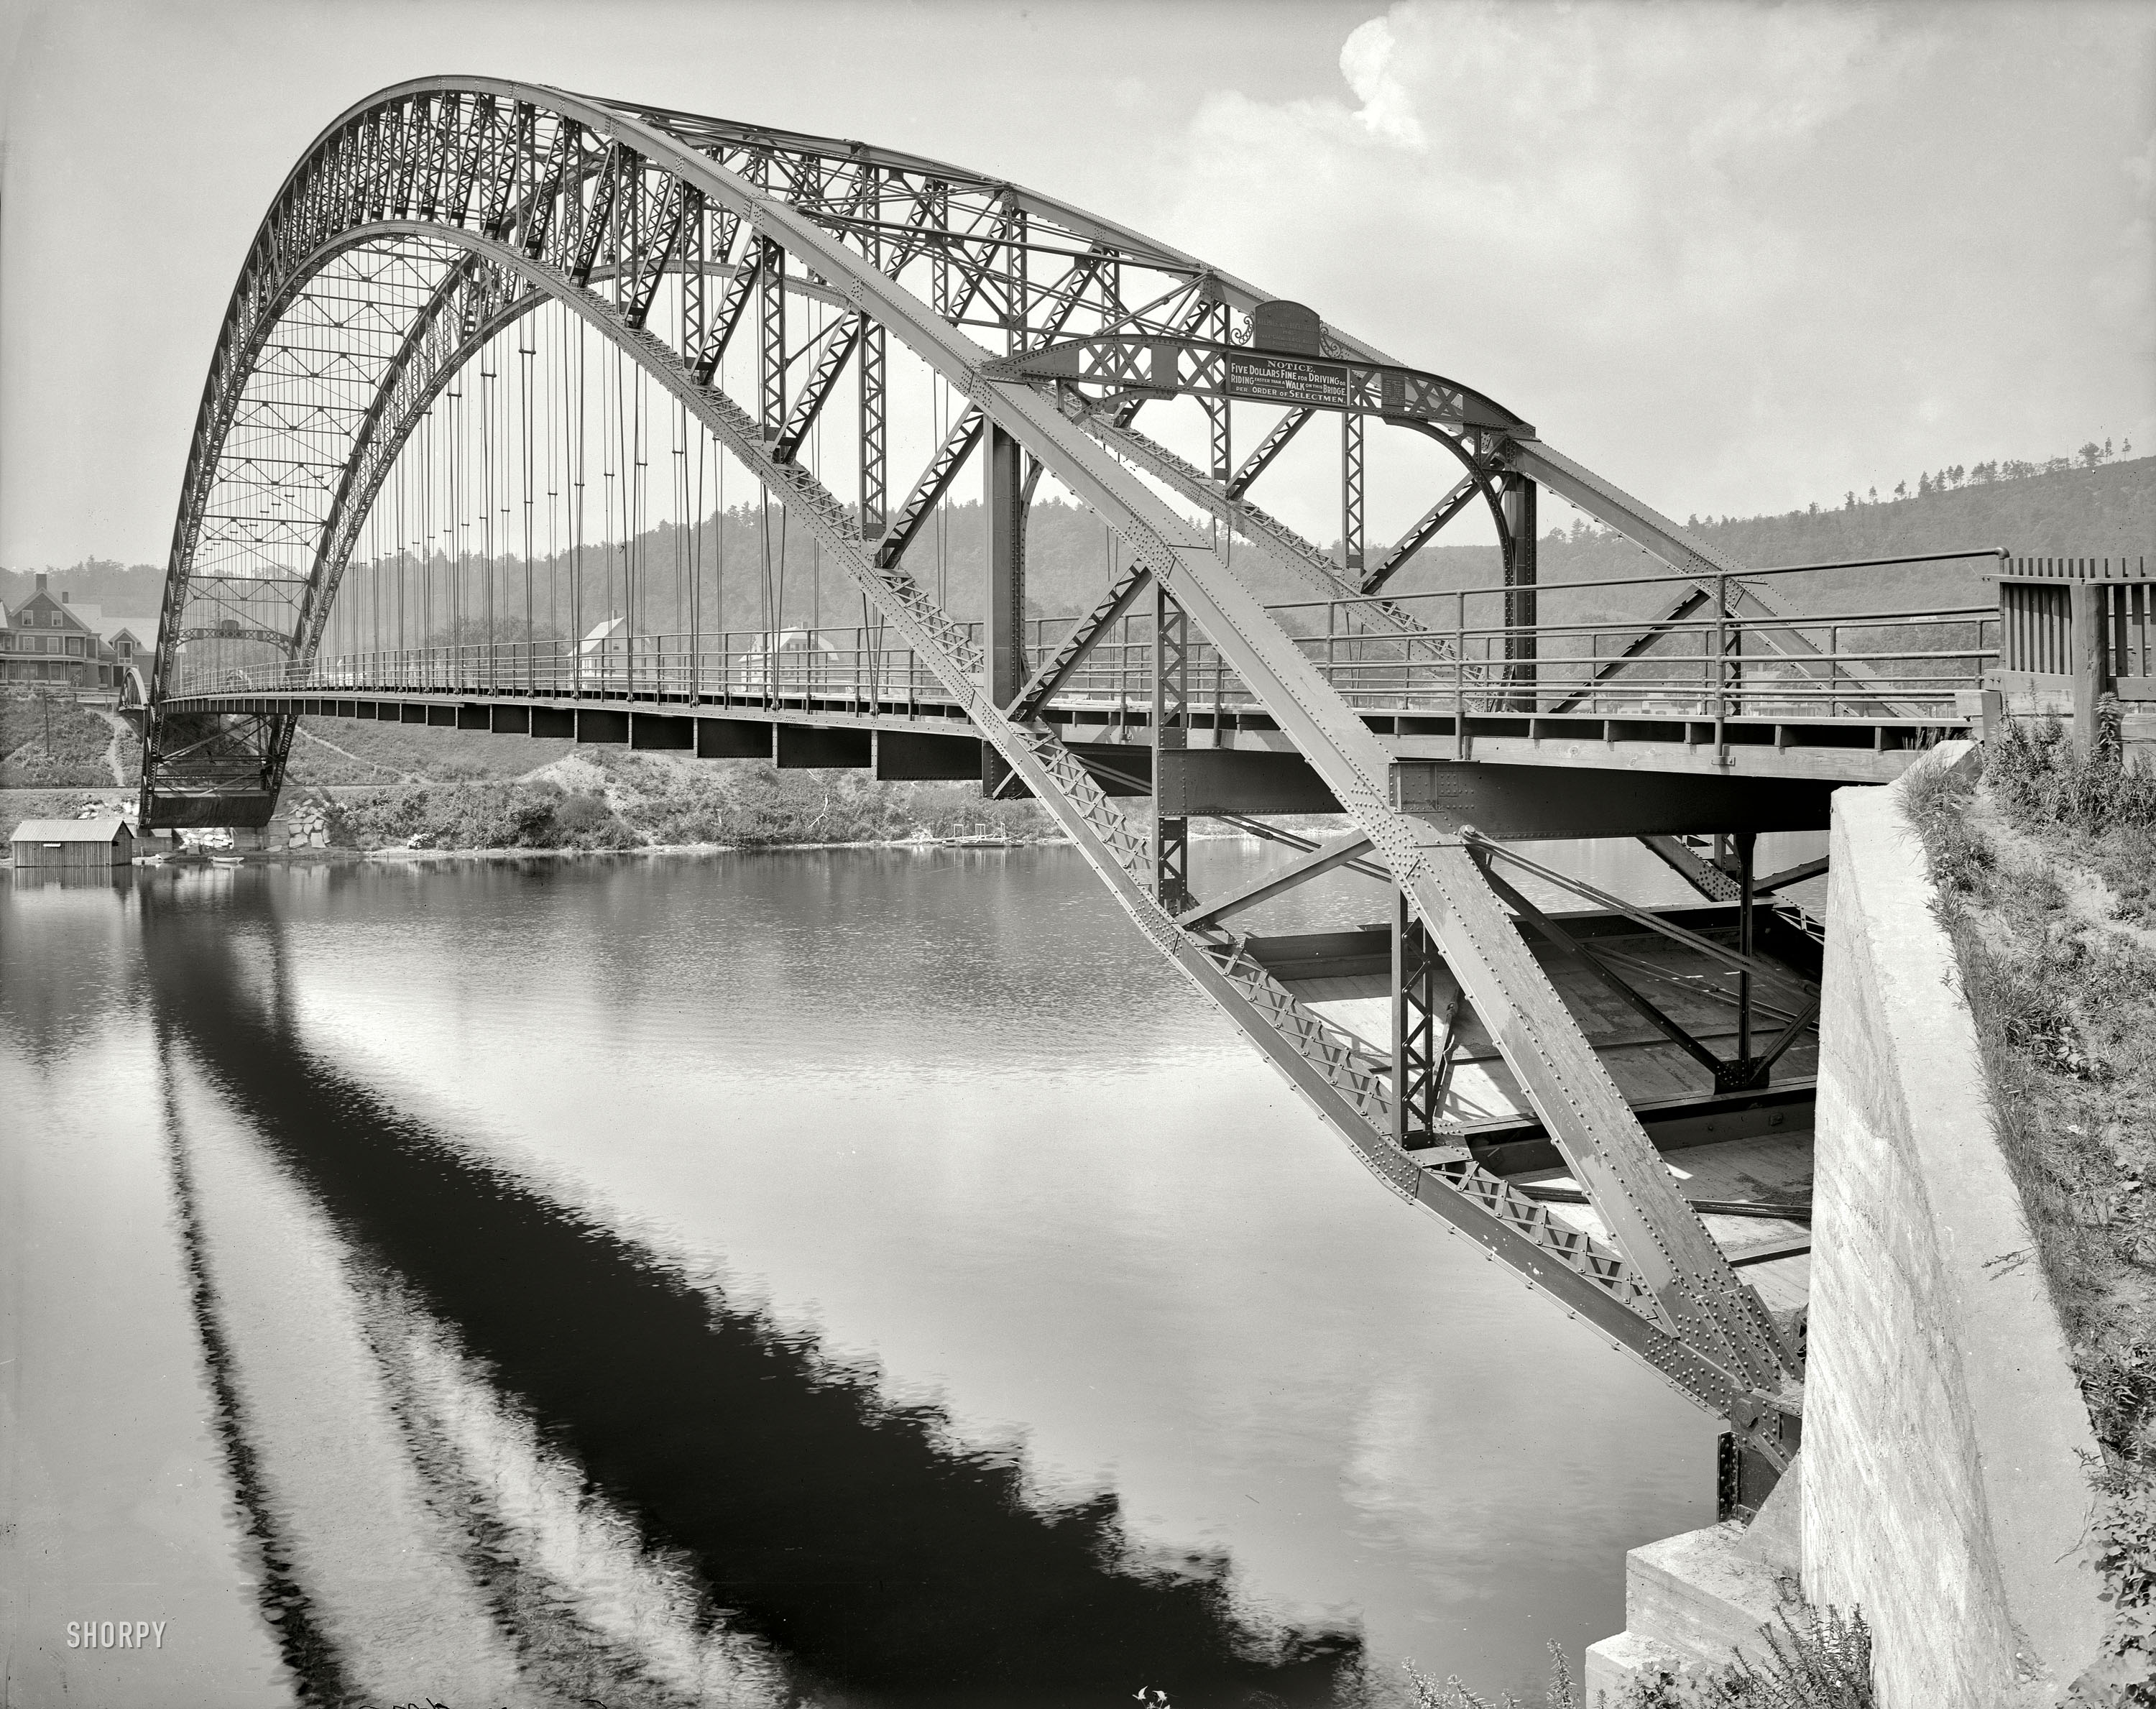 Circa 1908. "Arch bridge, Bellows Falls, Vermont." Note the $5 fine for speeders. 8x10 inch dry plate glass negative, Detroit Publishing Company. View full size.